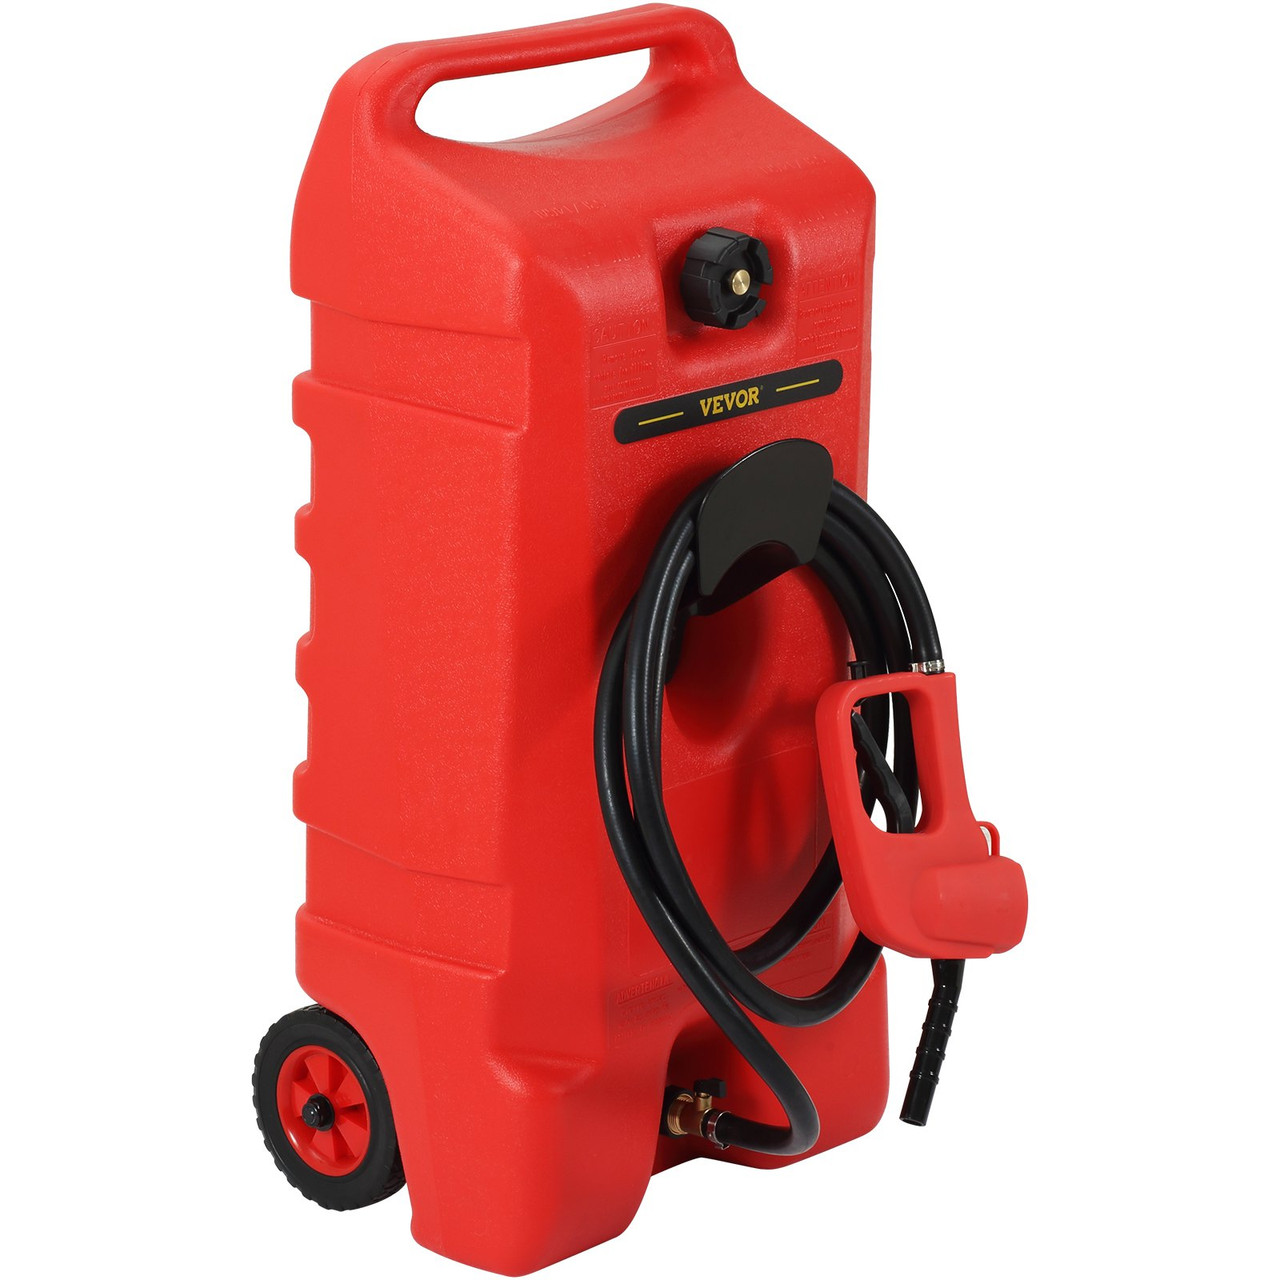 14 Gallon Fuel Caddy, Gas Storage Tank on-Wheels, with Siphon Pump and 9.8 ft Long Hose, Gasoline Diesel Fuel Tank for Cars, Lawn Mowers, ATVs, Boats, More, Red